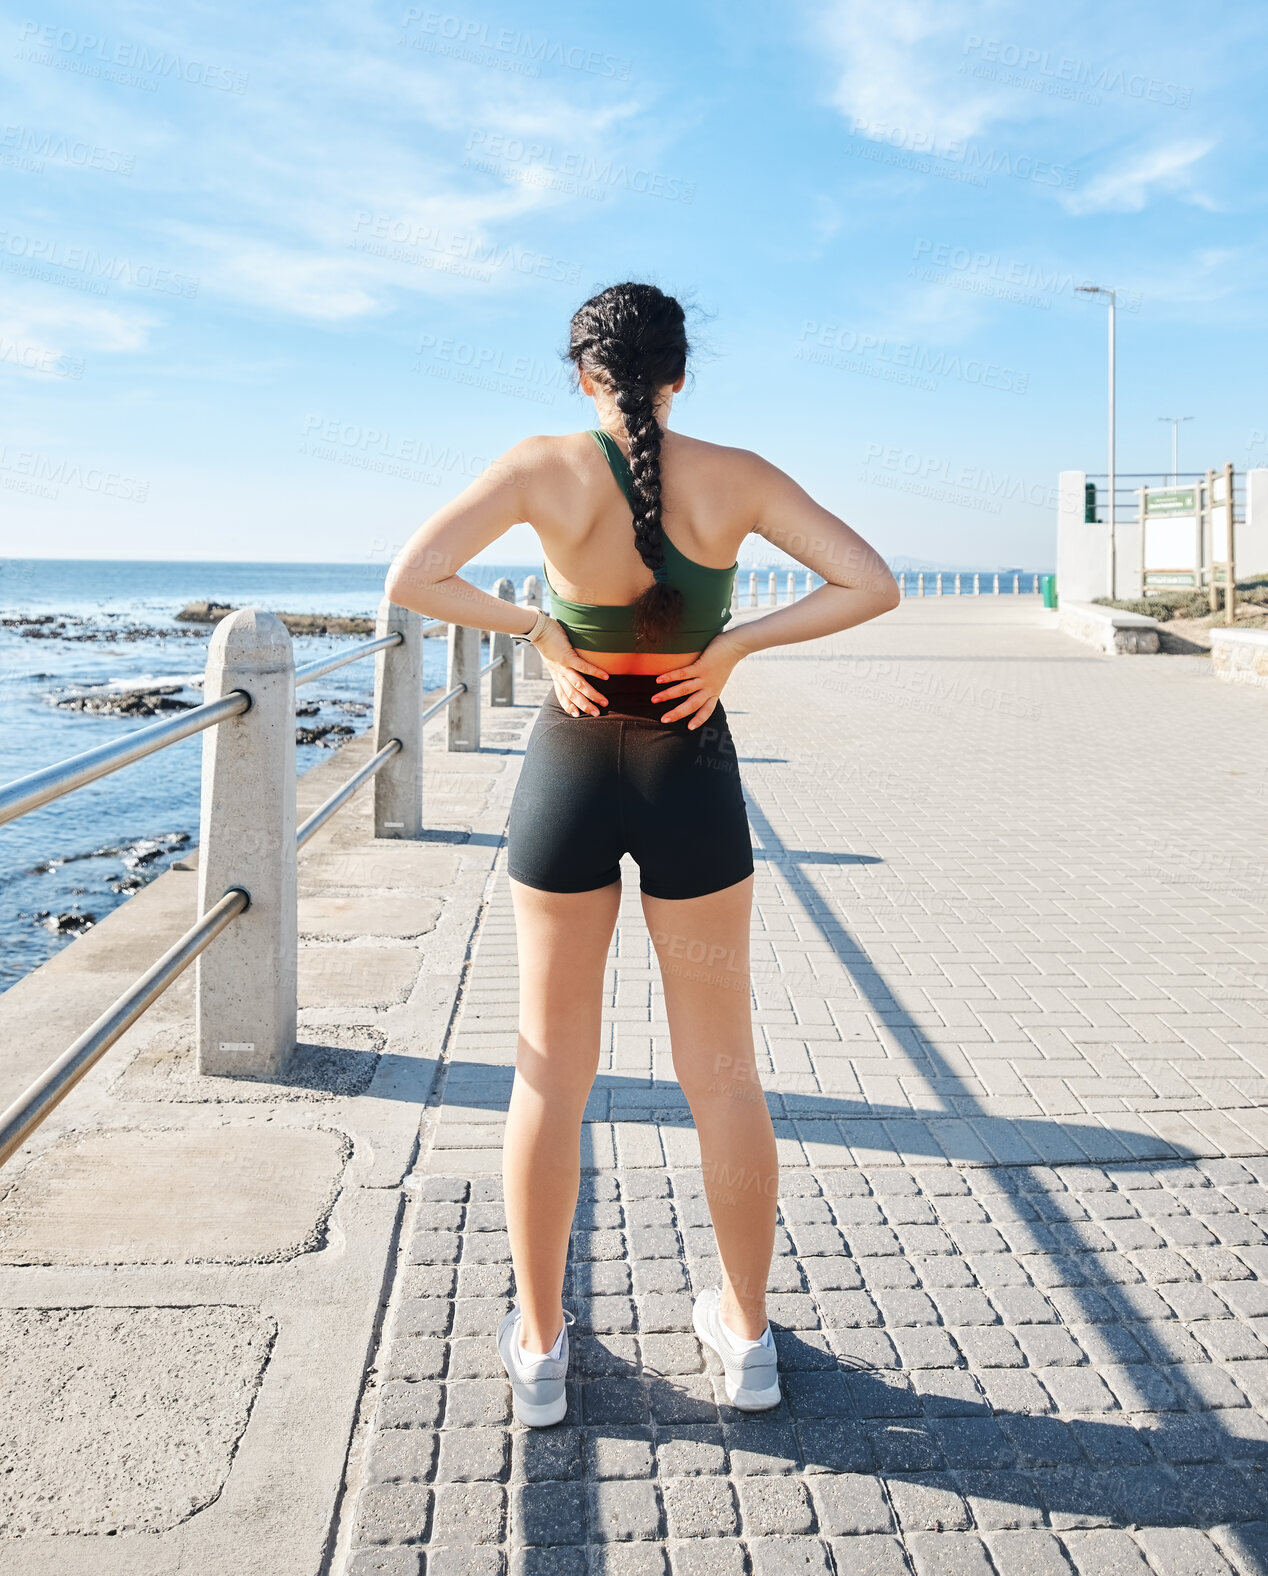 Buy stock photo Sports woman, back pain and red glow by beach fitness, ocean workout or sea training with healthcare wellness crisis. Injury, ache and body stress for runner with abstract burnout on medical anatomy